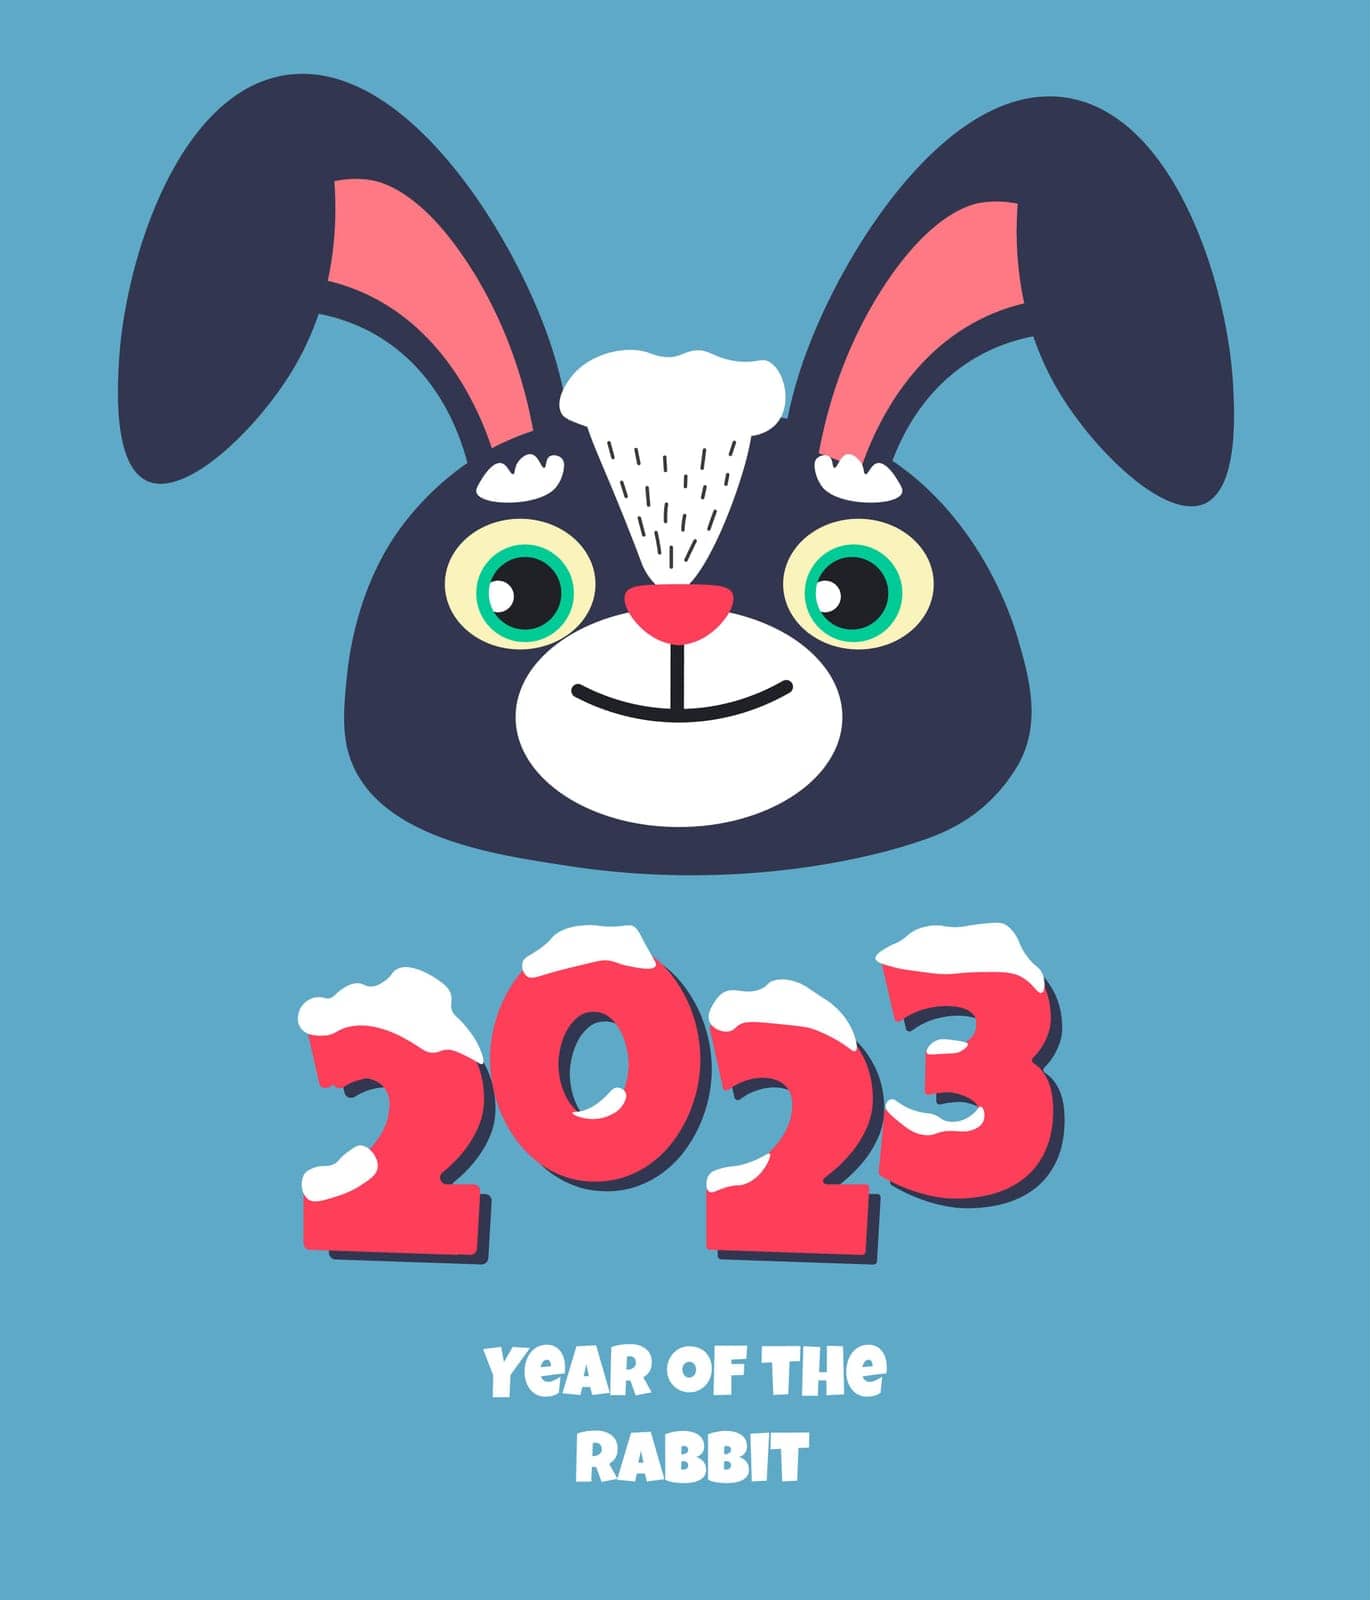 Year of rabbit, 2023 celebration of winter holiday by Sonulkaster